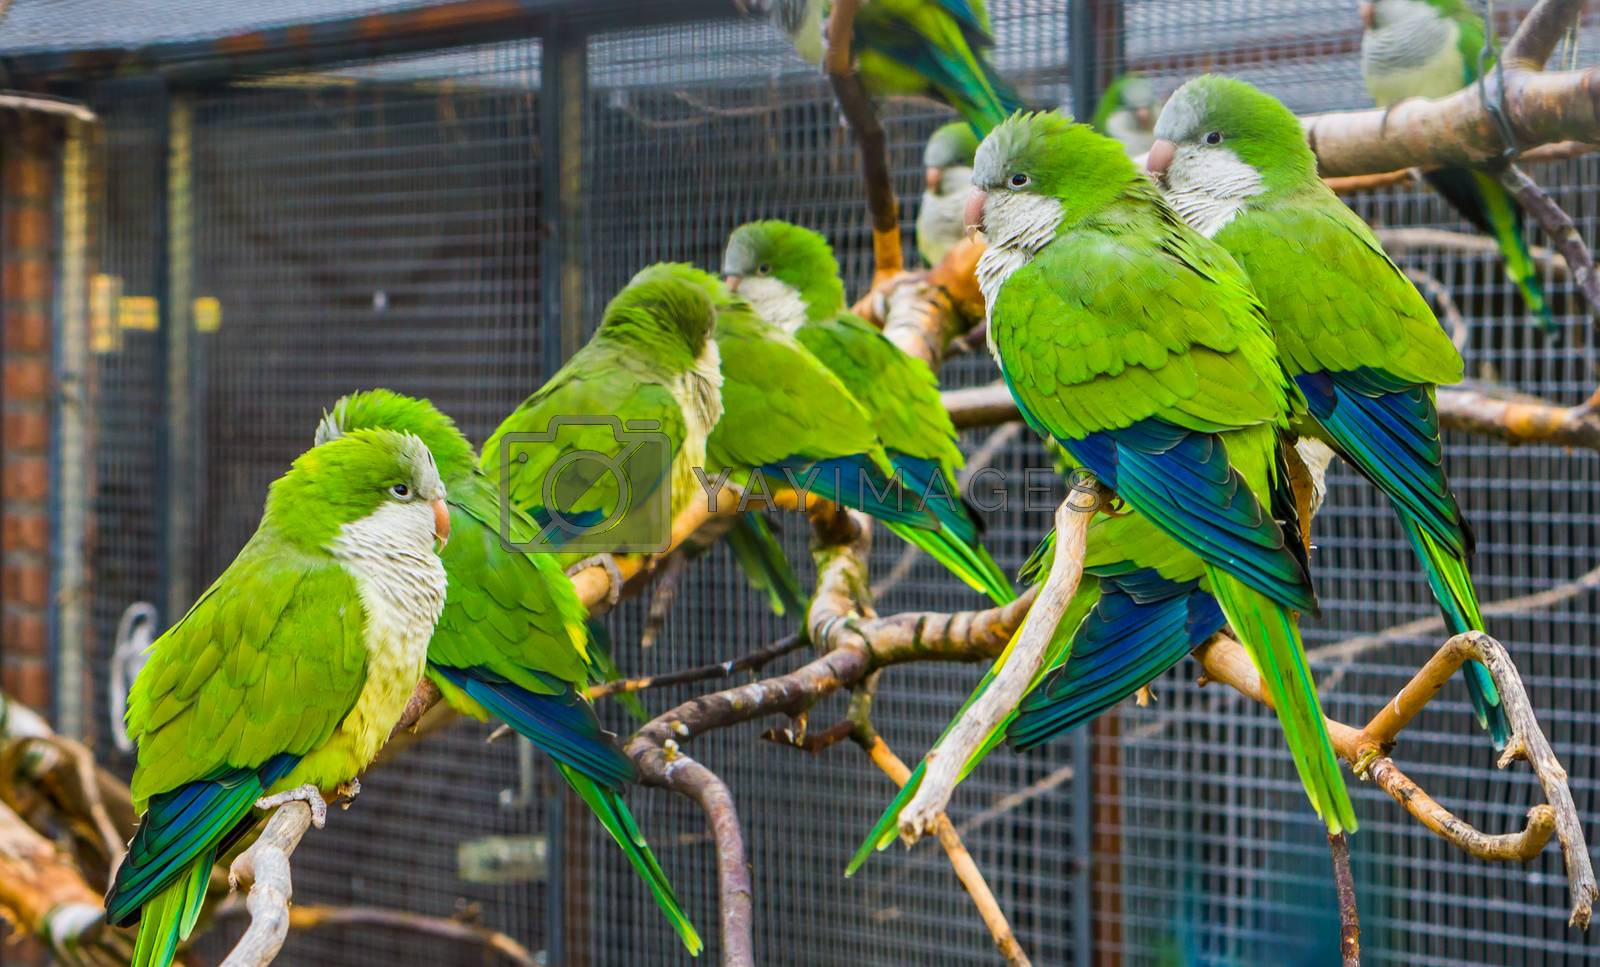 many monk parakeets sitting together on branches in the aviary, popular pets in aviculture, tropical birds from Argentina